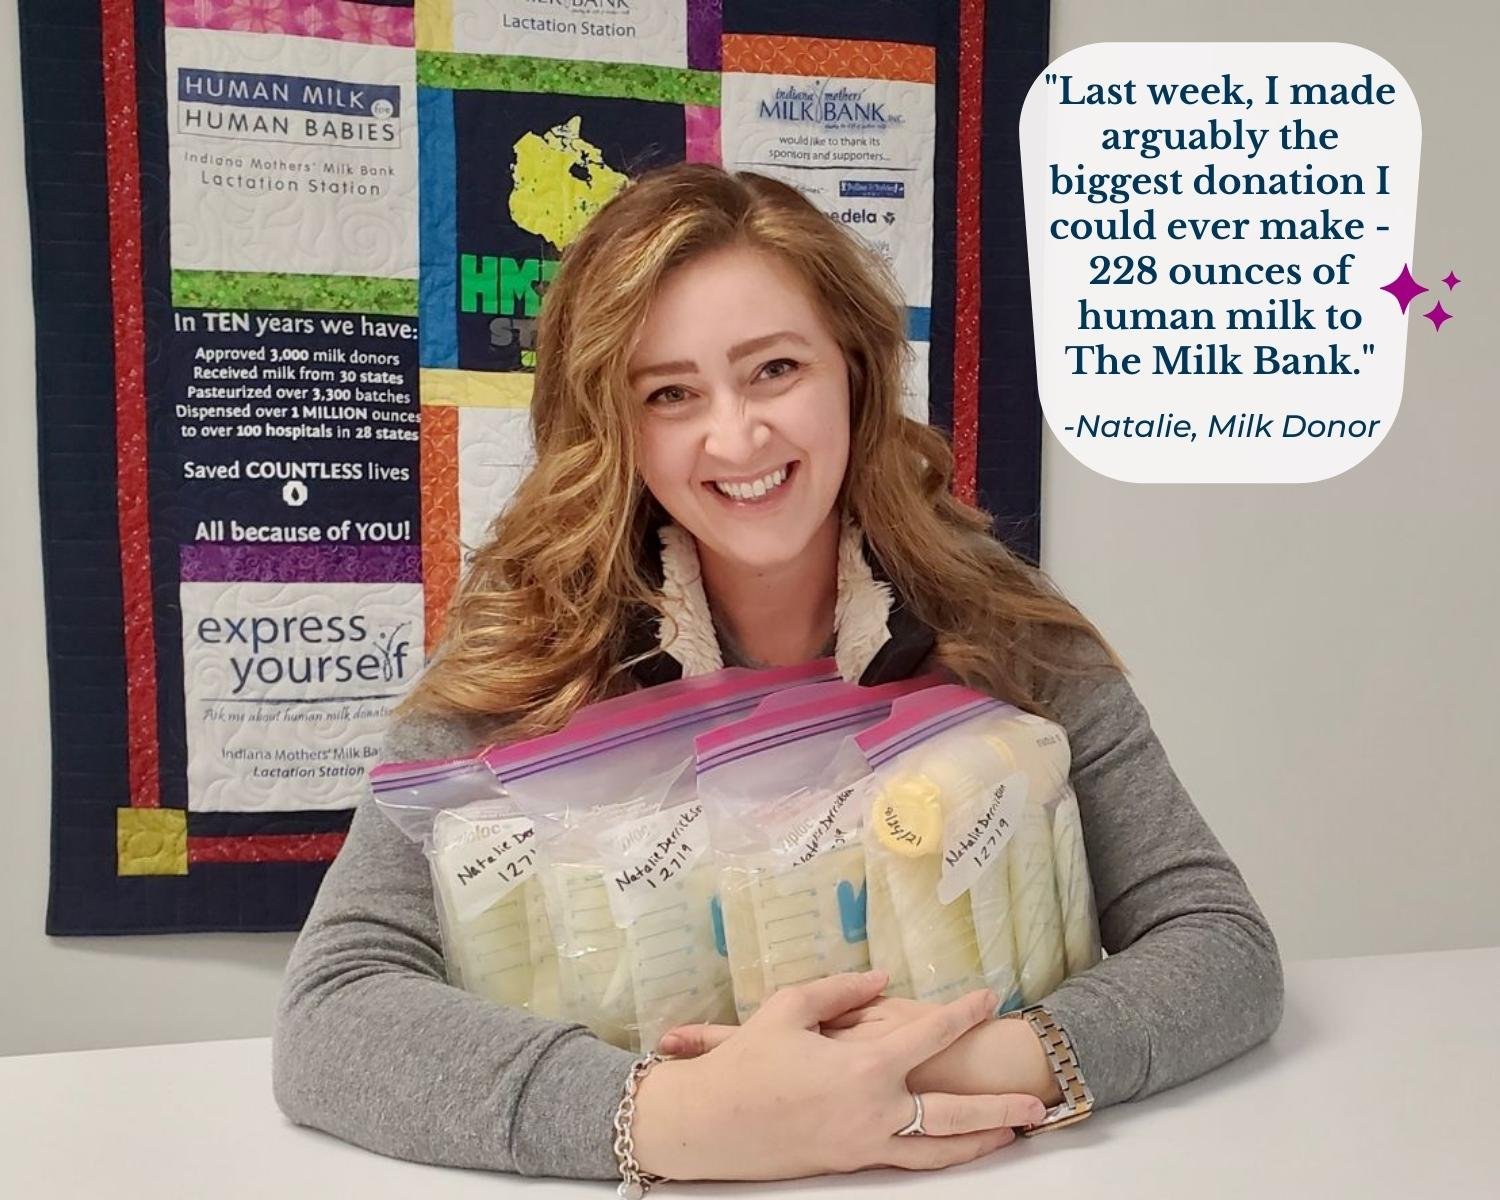 Milk Donor holds donation of extra breast milk and smiles.